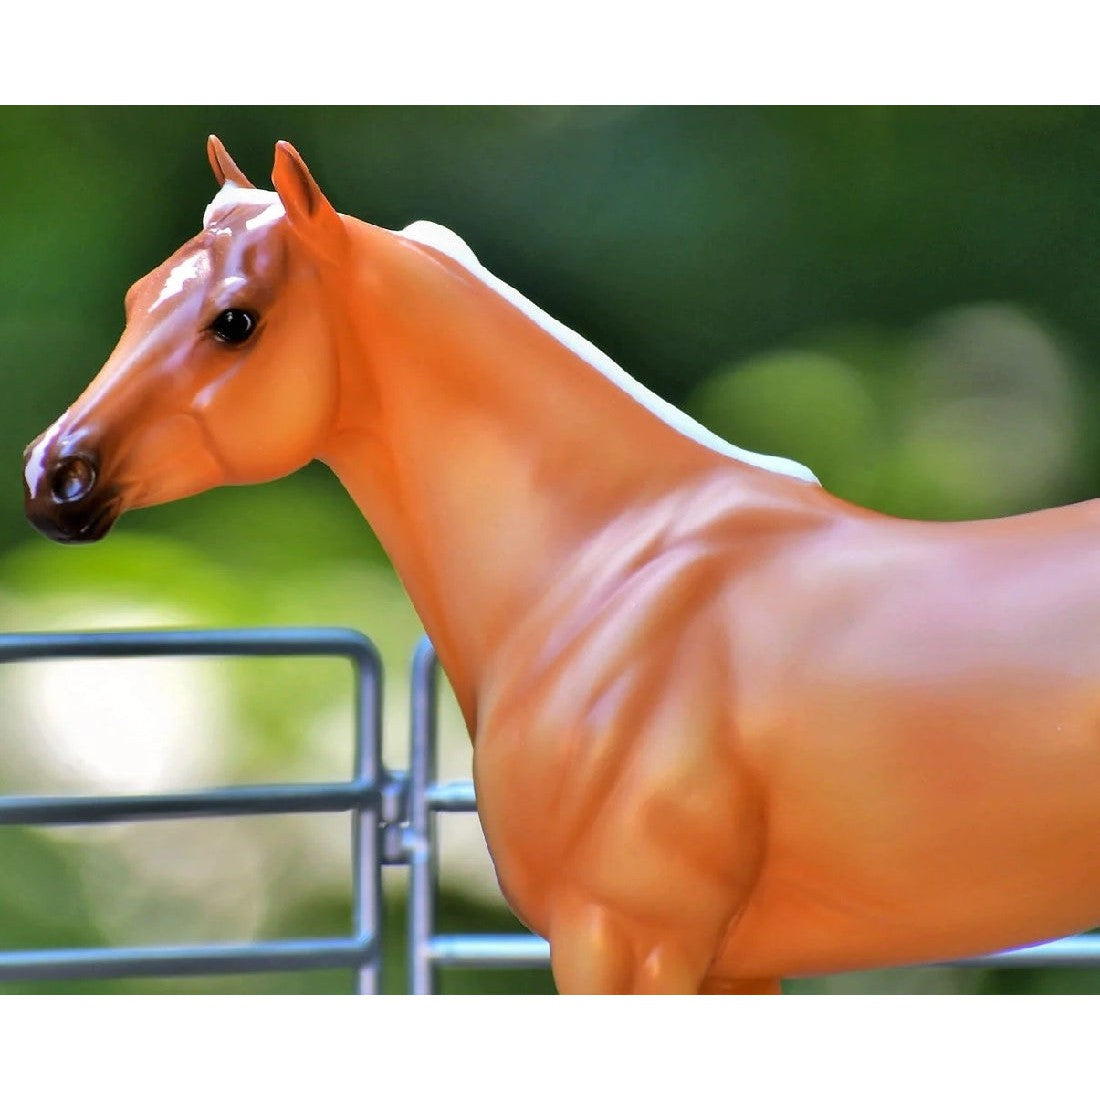 An Anna Scarpati toy horse model against a blurred green background.